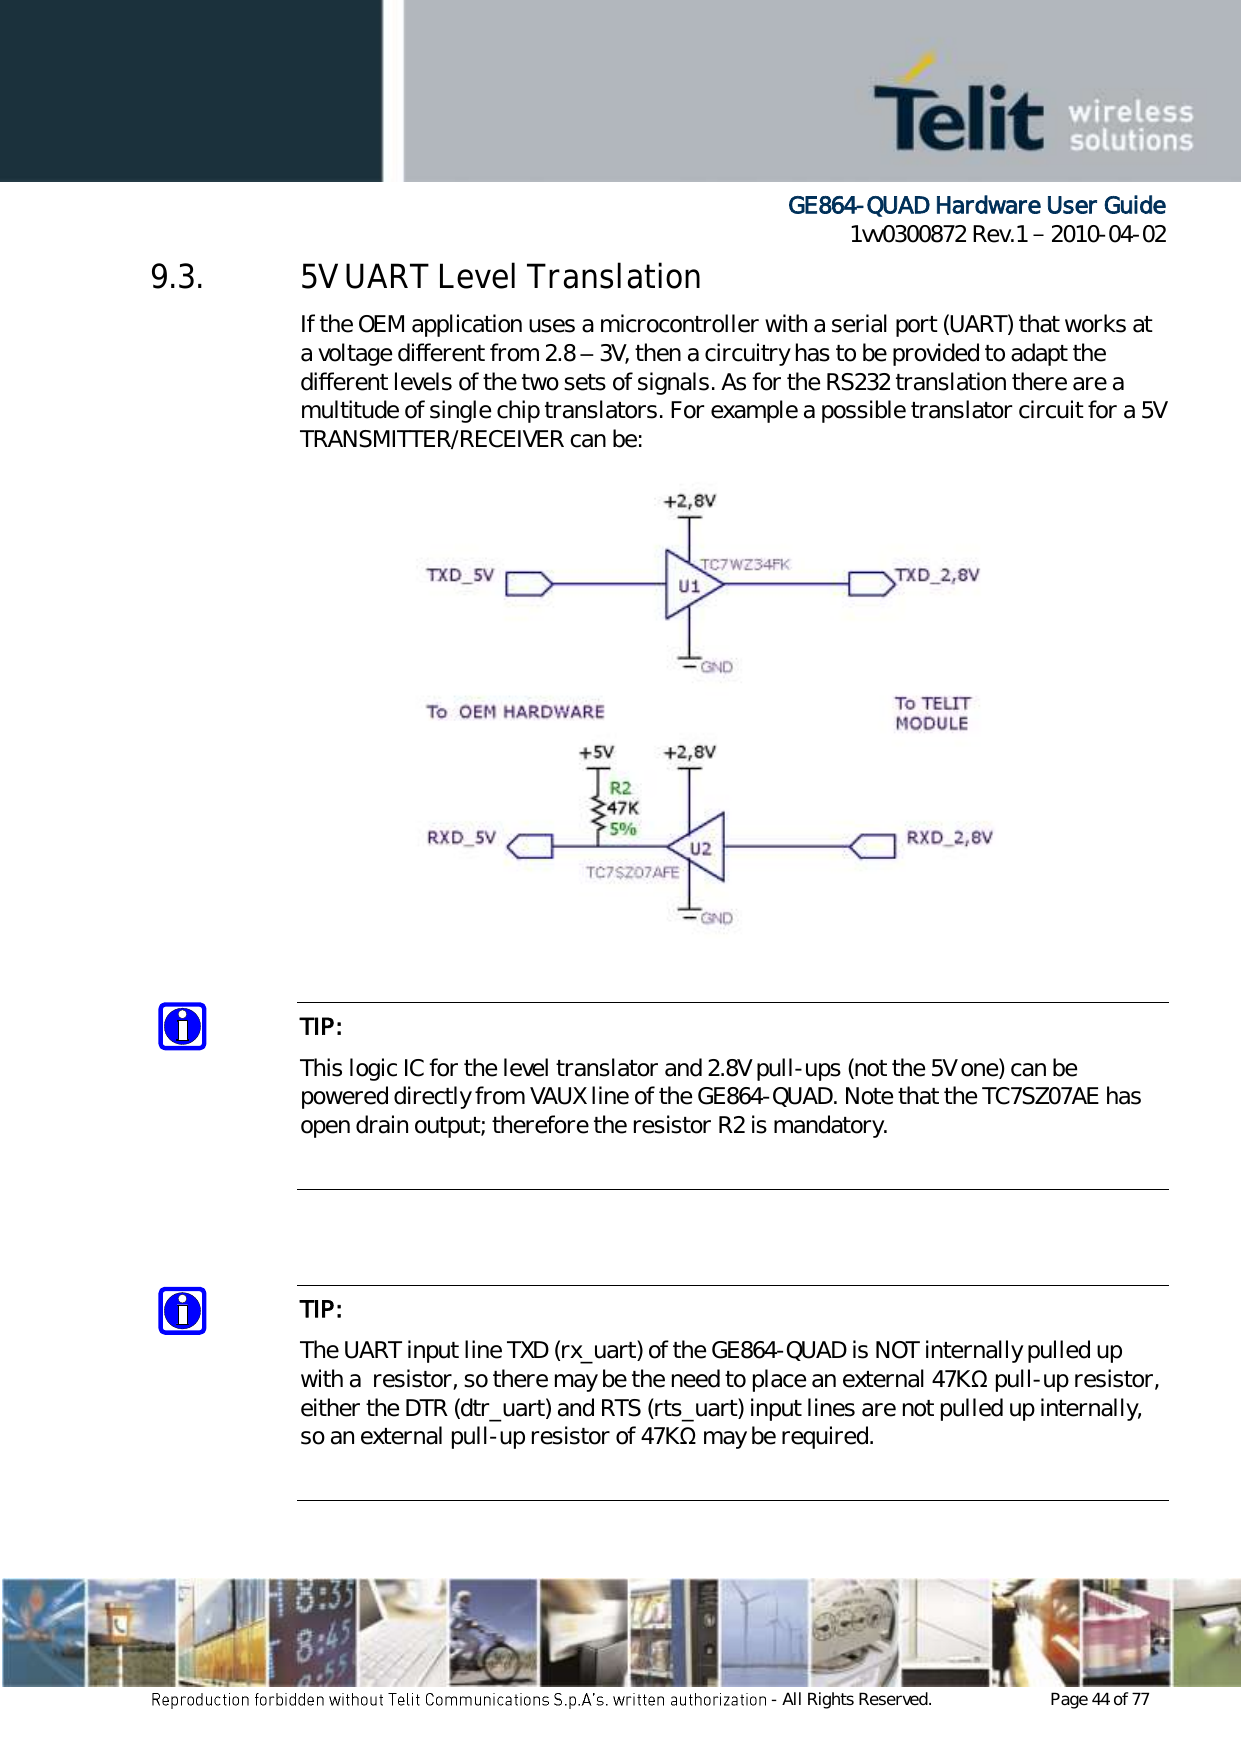      GE864-QUAD Hardware User Guide 1vv0300872 Rev.1   2010-04-02 - All Rights Reserved.    Page 44 of 77  9.3. 5V UART Level Translation If the OEM application uses a microcontroller with a serial port (UART) that works at a voltage different from 2.8 – 3V, then a circuitry has to be provided to adapt the different levels of the two sets of signals. As for the RS232 translation there are a multitude of single chip translators. For example a possible translator circuit for a 5V TRANSMITTER/RECEIVER can be:              TIP: This logic IC for the level translator and 2.8V pull-ups (not the 5V one) can be powered directly from VAUX line of the GE864-QUAD. Note that the TC7SZ07AE has open drain output; therefore the resistor R2 is mandatory.    TIP: The UART input line TXD (rx_uart) of the GE864-QUAD is NOT internally pulled up with a  resistor, so there may be the need to place an external 47KΩ pull-up resistor, either the DTR (dtr_uart) and RTS (rts_uart) input lines are not pulled up internally, so an external pull-up resistor of 47KΩ may be required.  